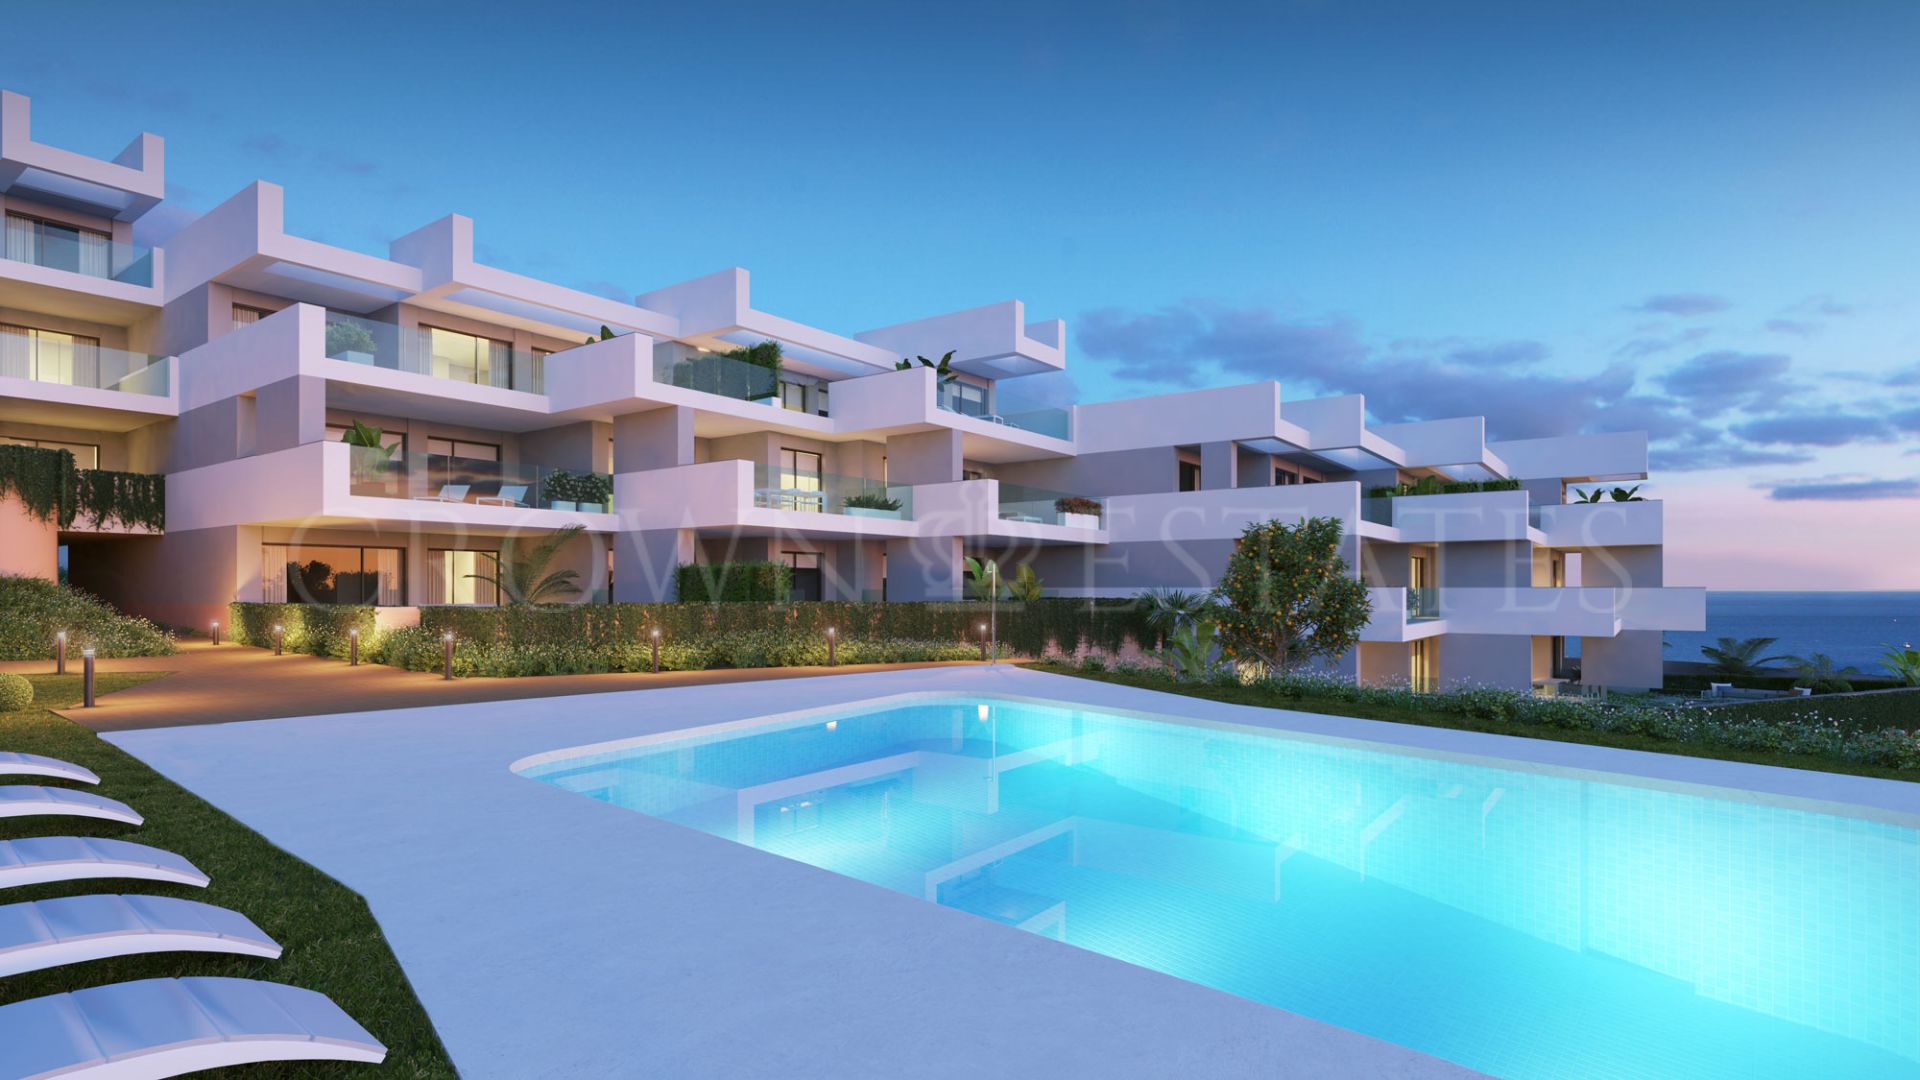 Pure South, contemporary apartments with sea views for a resort-style living in La Duquesa area